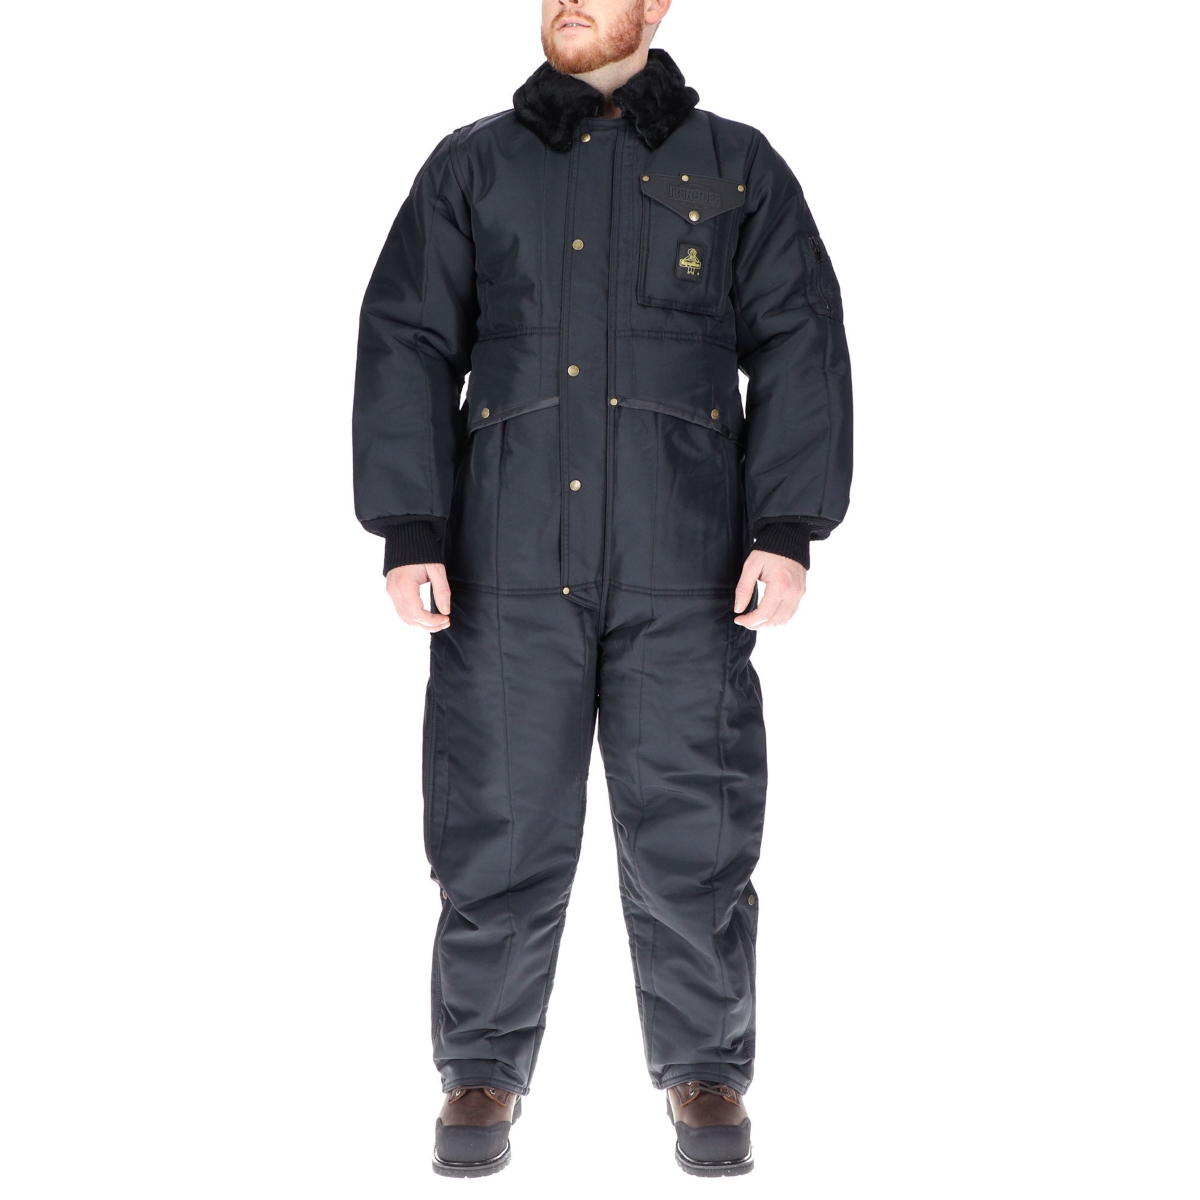 Big & Tall Iron-Tuff Insulated Coveralls -50F Extreme Cold Protection - Navy